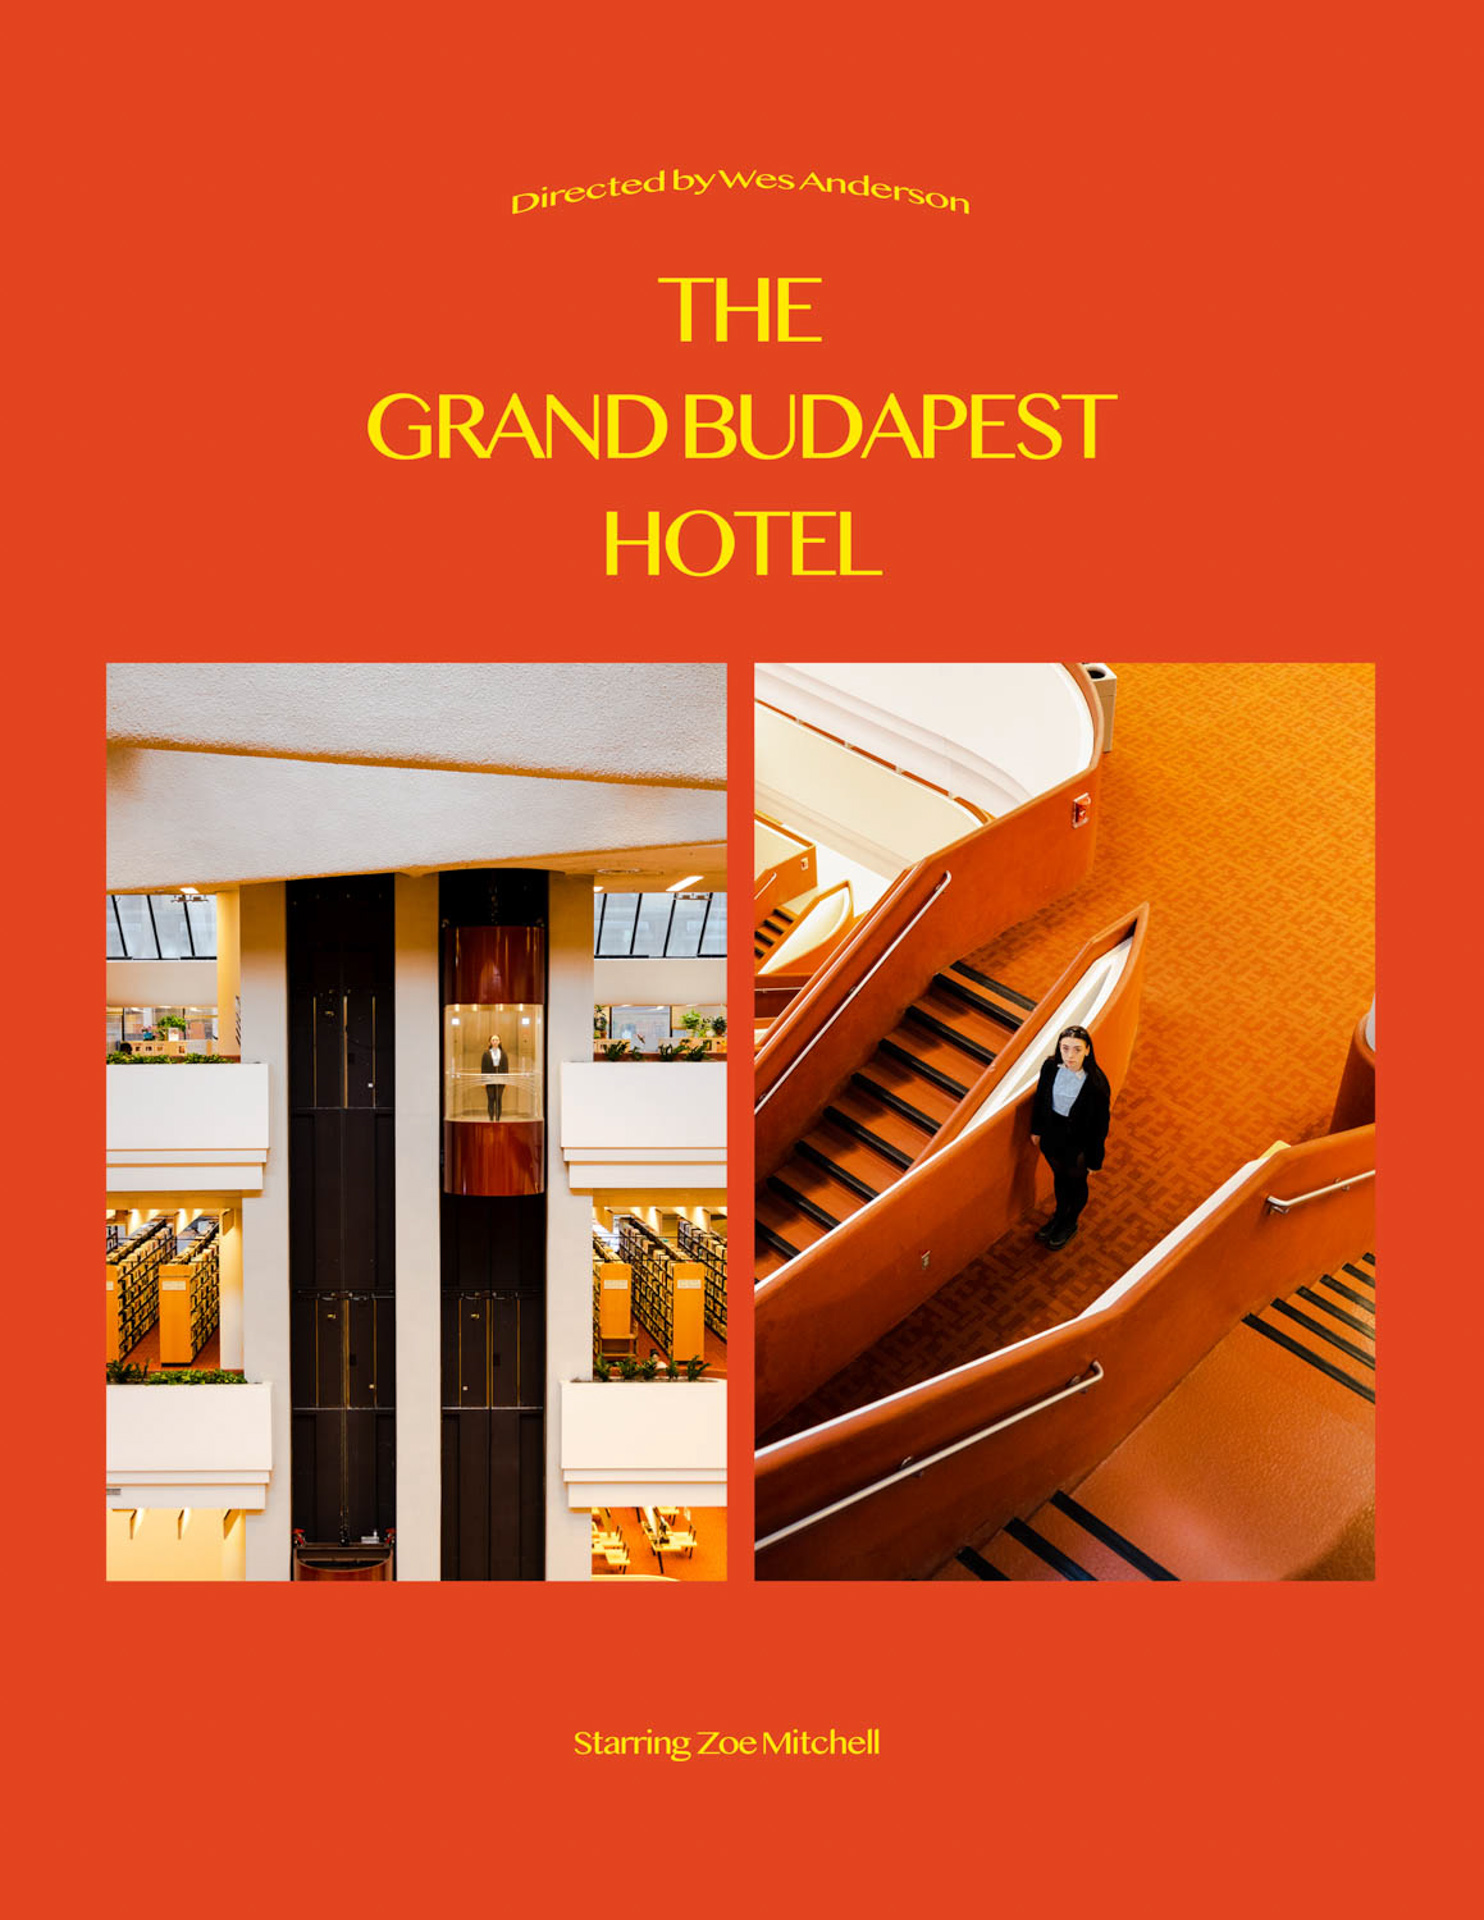 A poster like image that has a title of The Grand Budapest Hotel, There is two images featured, one of a library elevator that has a someone ridinging in it and the other of a person standing in a stair hallway